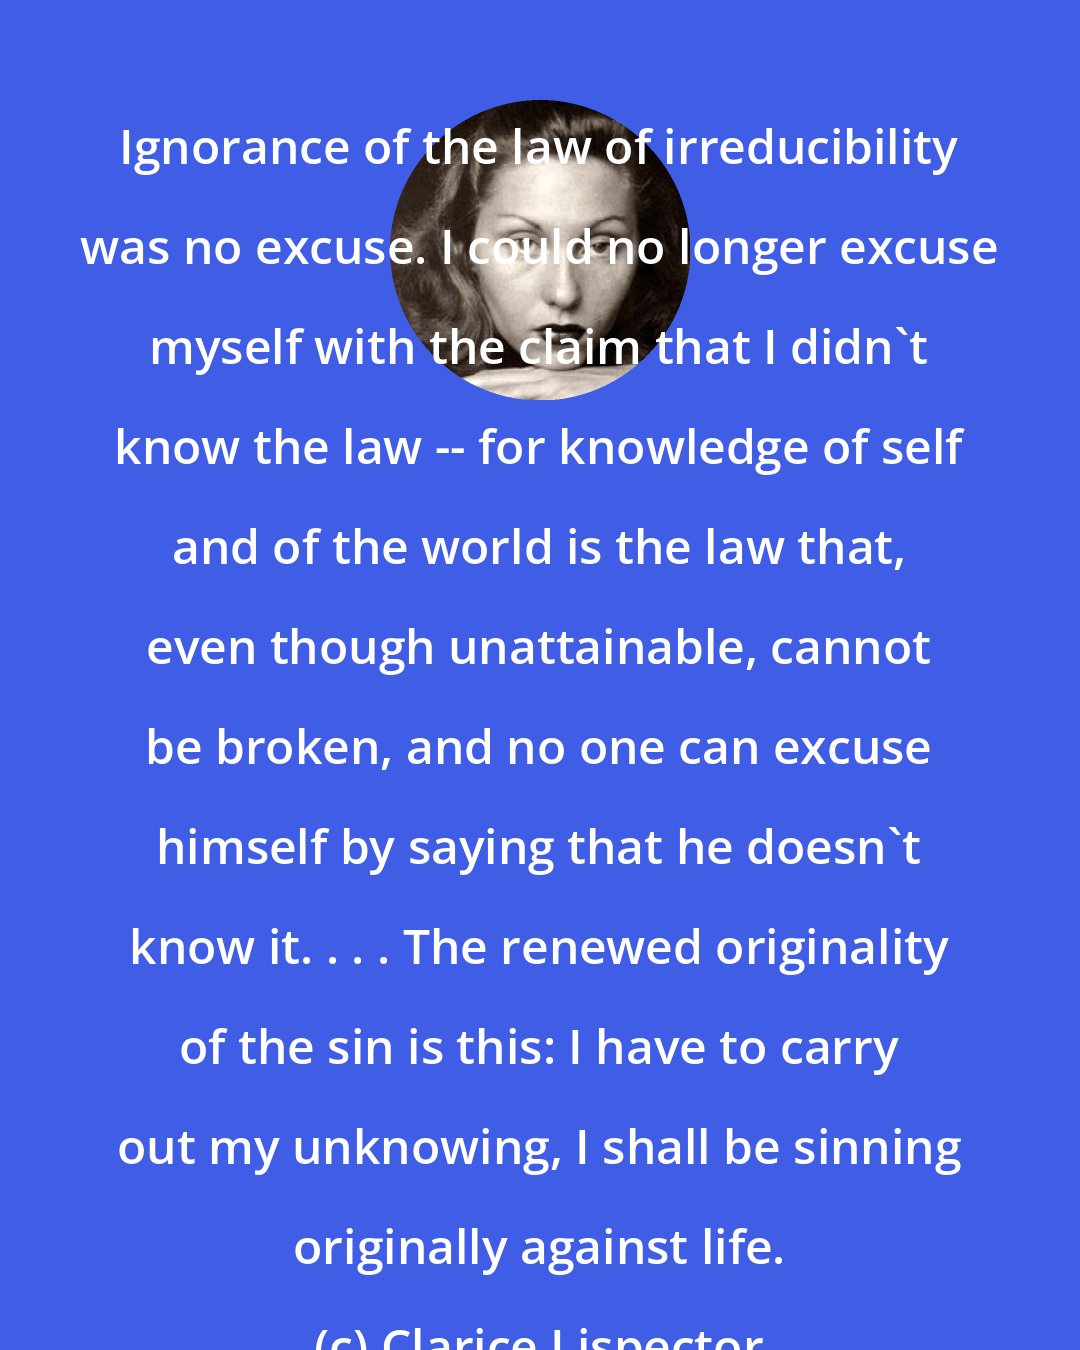 Clarice Lispector: Ignorance of the law of irreducibility was no excuse. I could no longer excuse myself with the claim that I didn't know the law -- for knowledge of self and of the world is the law that, even though unattainable, cannot be broken, and no one can excuse himself by saying that he doesn't know it. . . . The renewed originality of the sin is this: I have to carry out my unknowing, I shall be sinning originally against life.